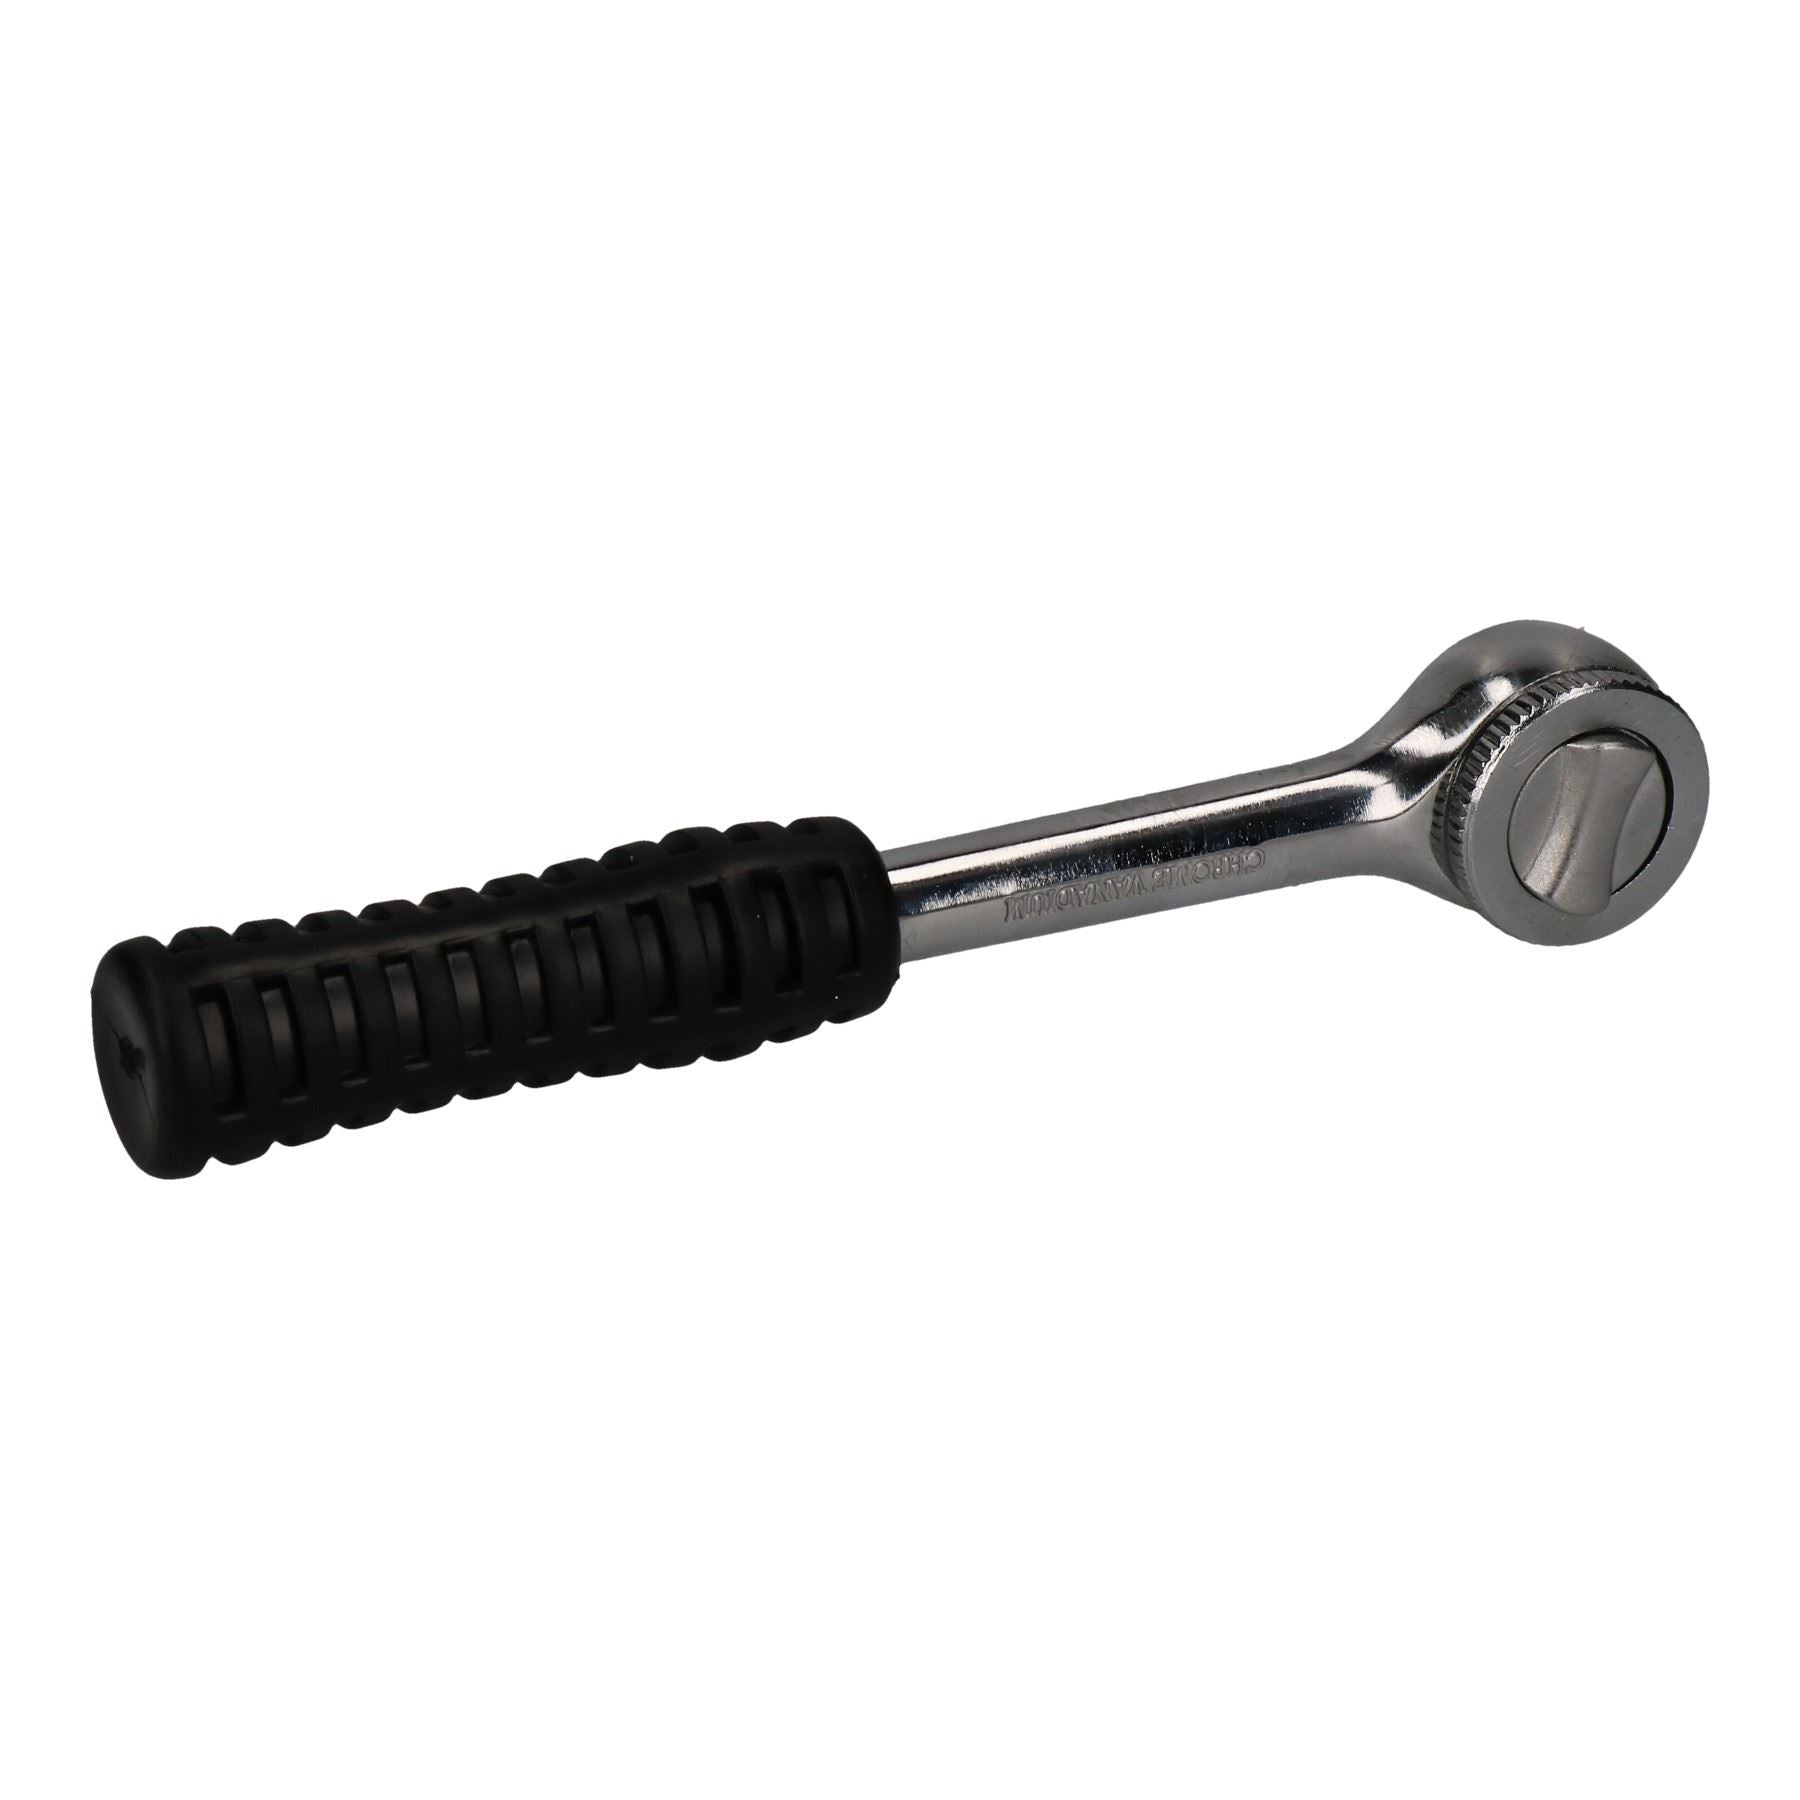 1/4" Drive Straight Ratchet With Rubber Grip Handle 45 Teeth Reversible